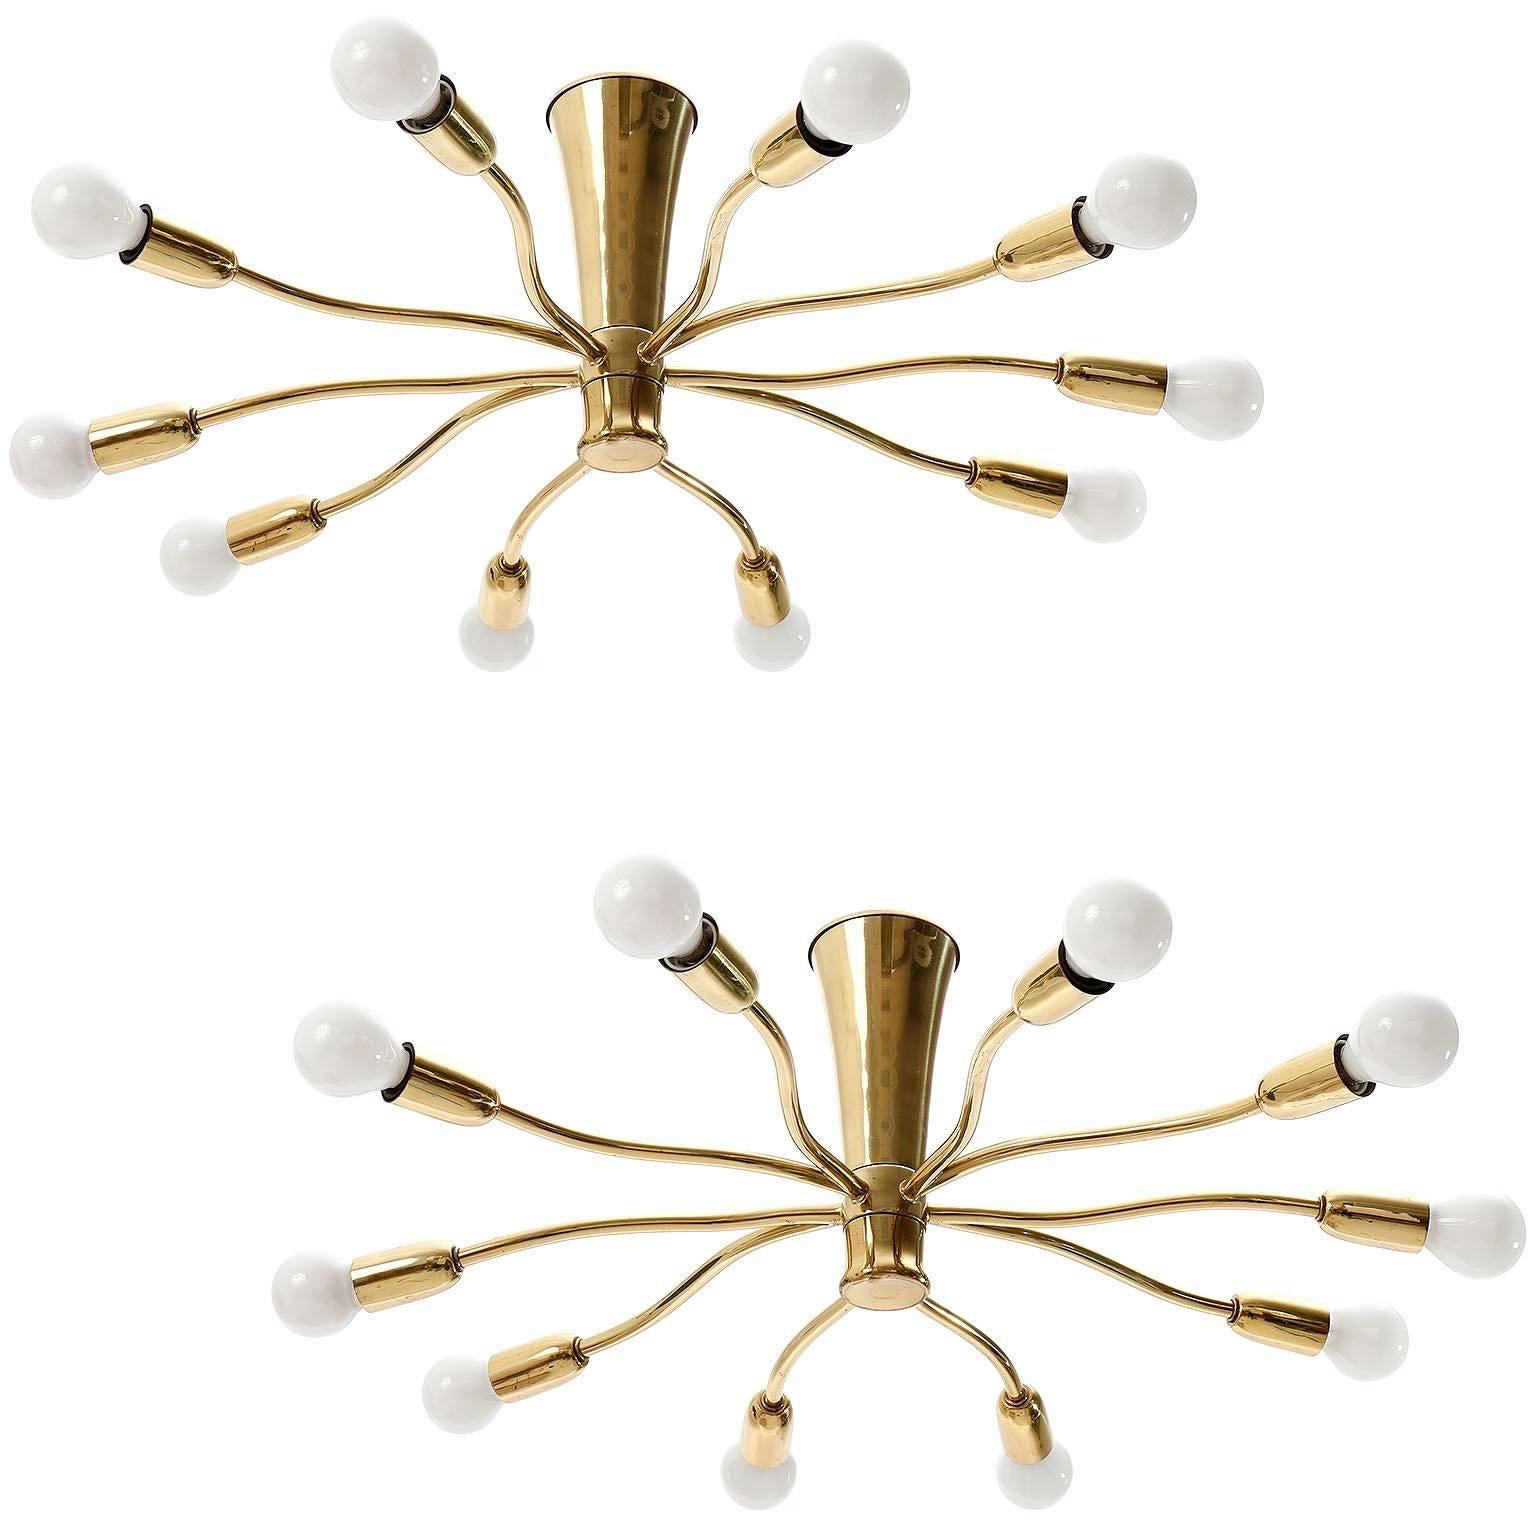 One of two 10-arm brass spider flush mount or wall light fixtures by Kalmar, manufactured in midcentury, circa 1960 (late 1950s or early 1960s).
The price is per fixture. They will are sold individually or as pair.
The lights can be mounted on a